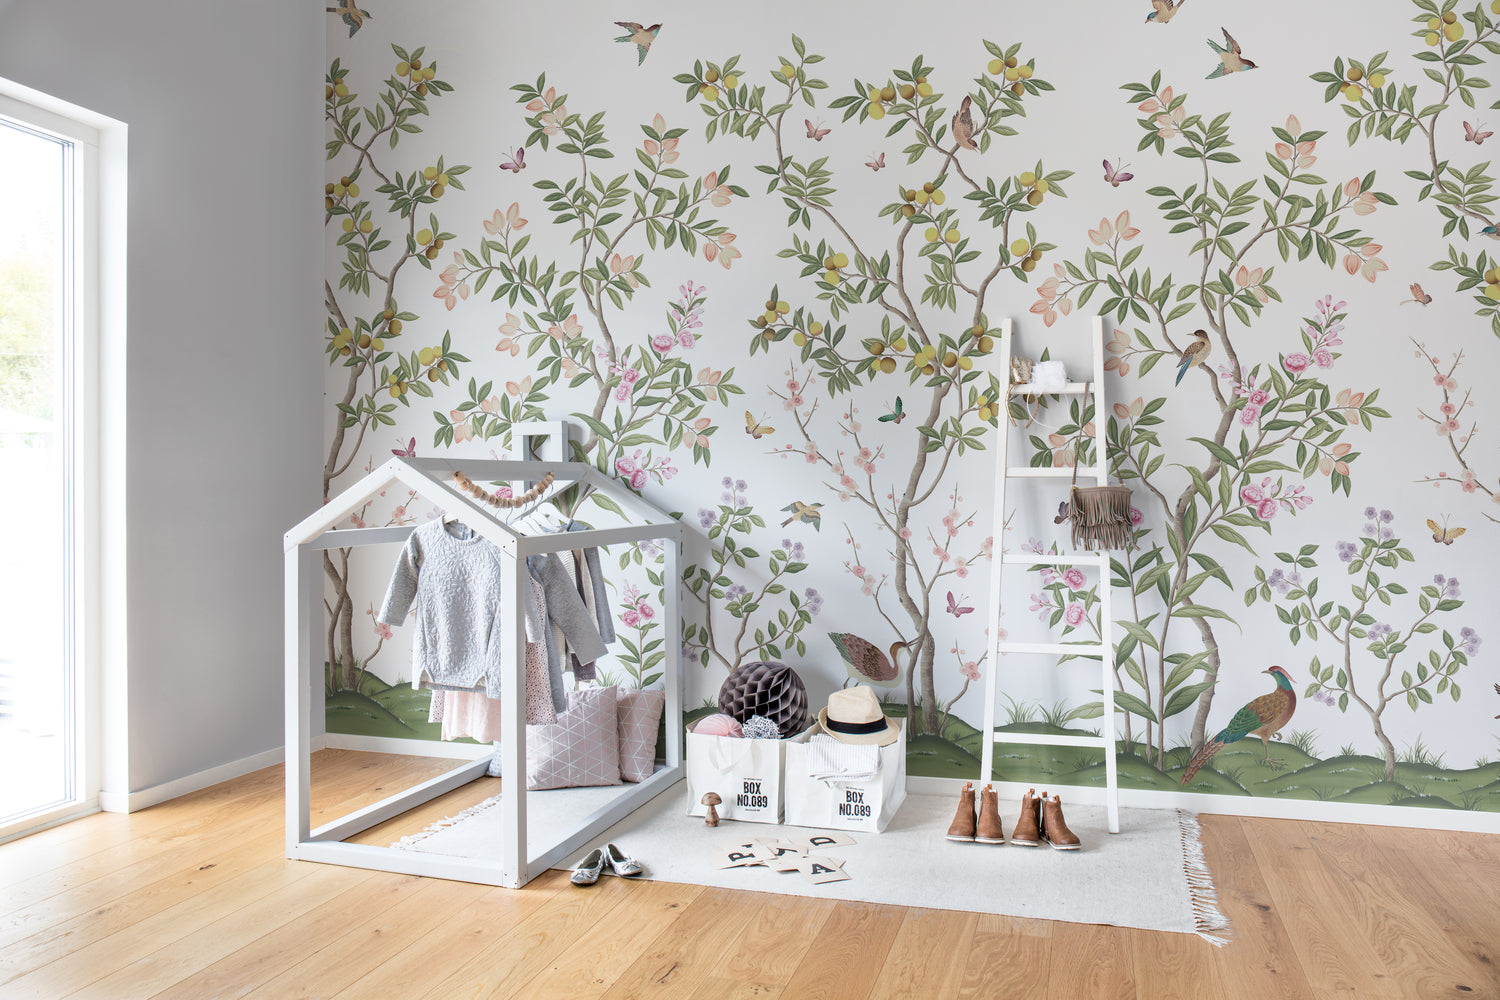 Chinoiserie Forestry Wallpaper in a kid's playroom